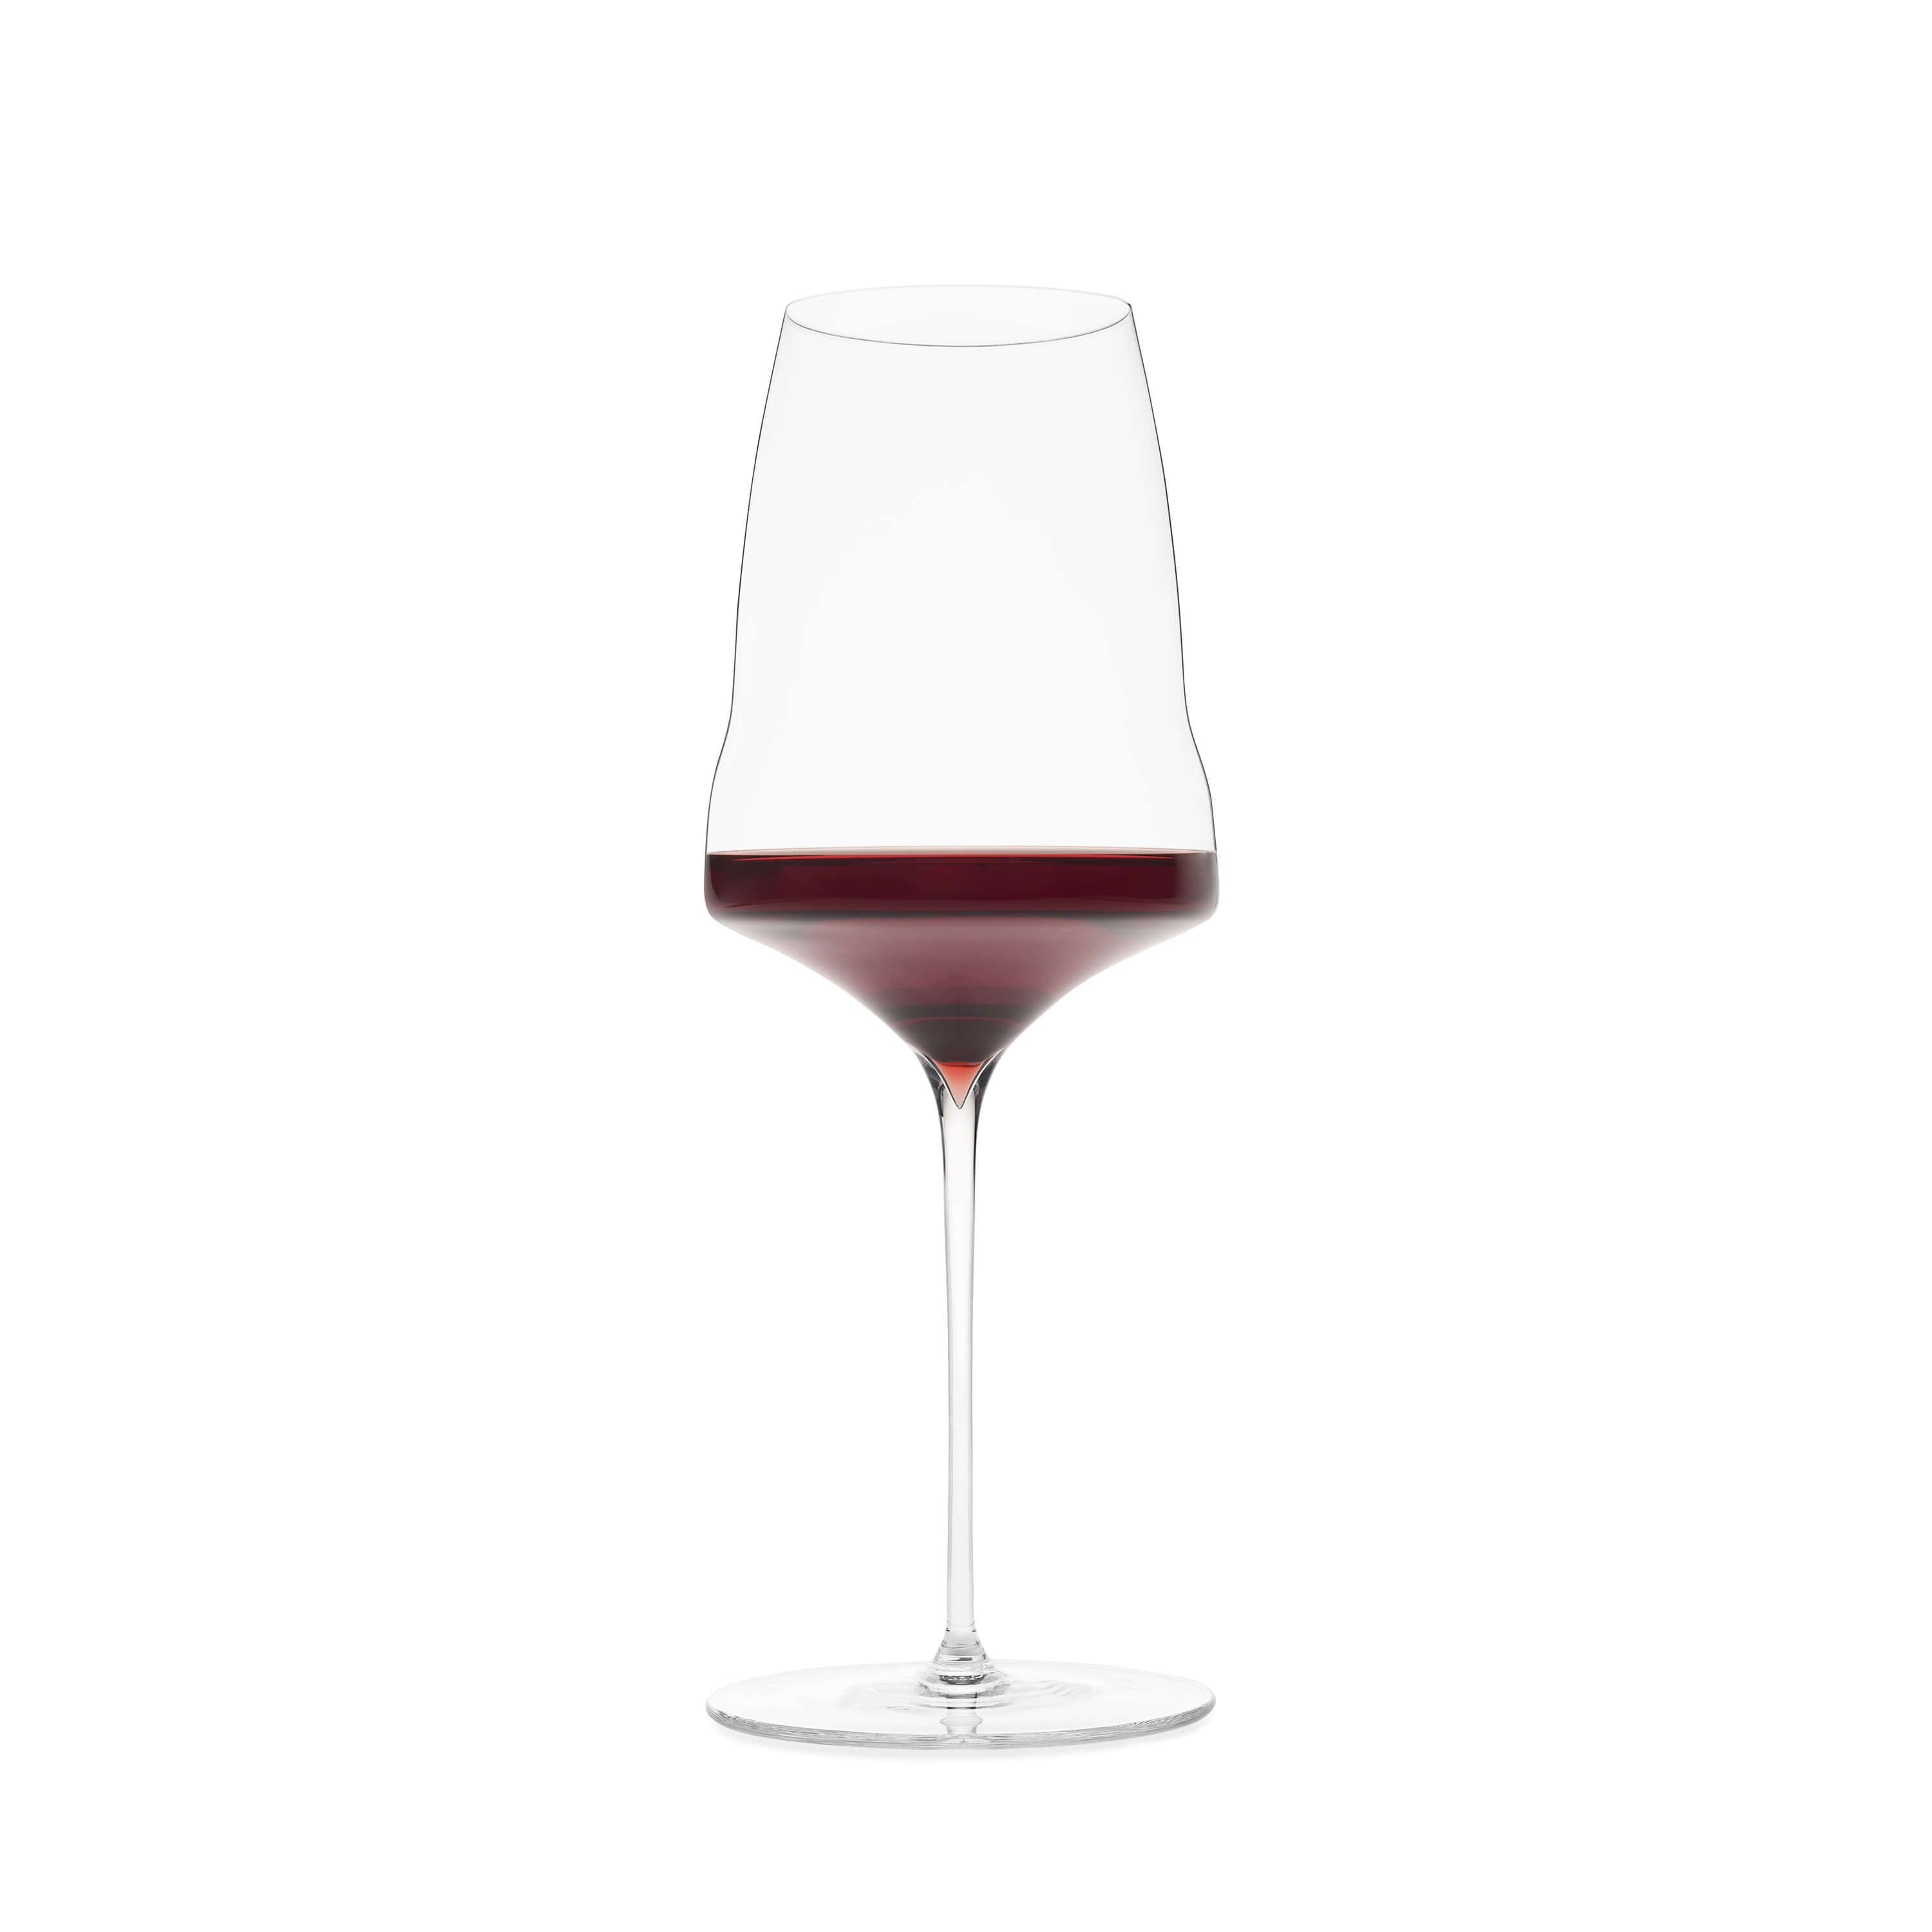 JOSEPHINE No 2 Universal glass filled with red wine